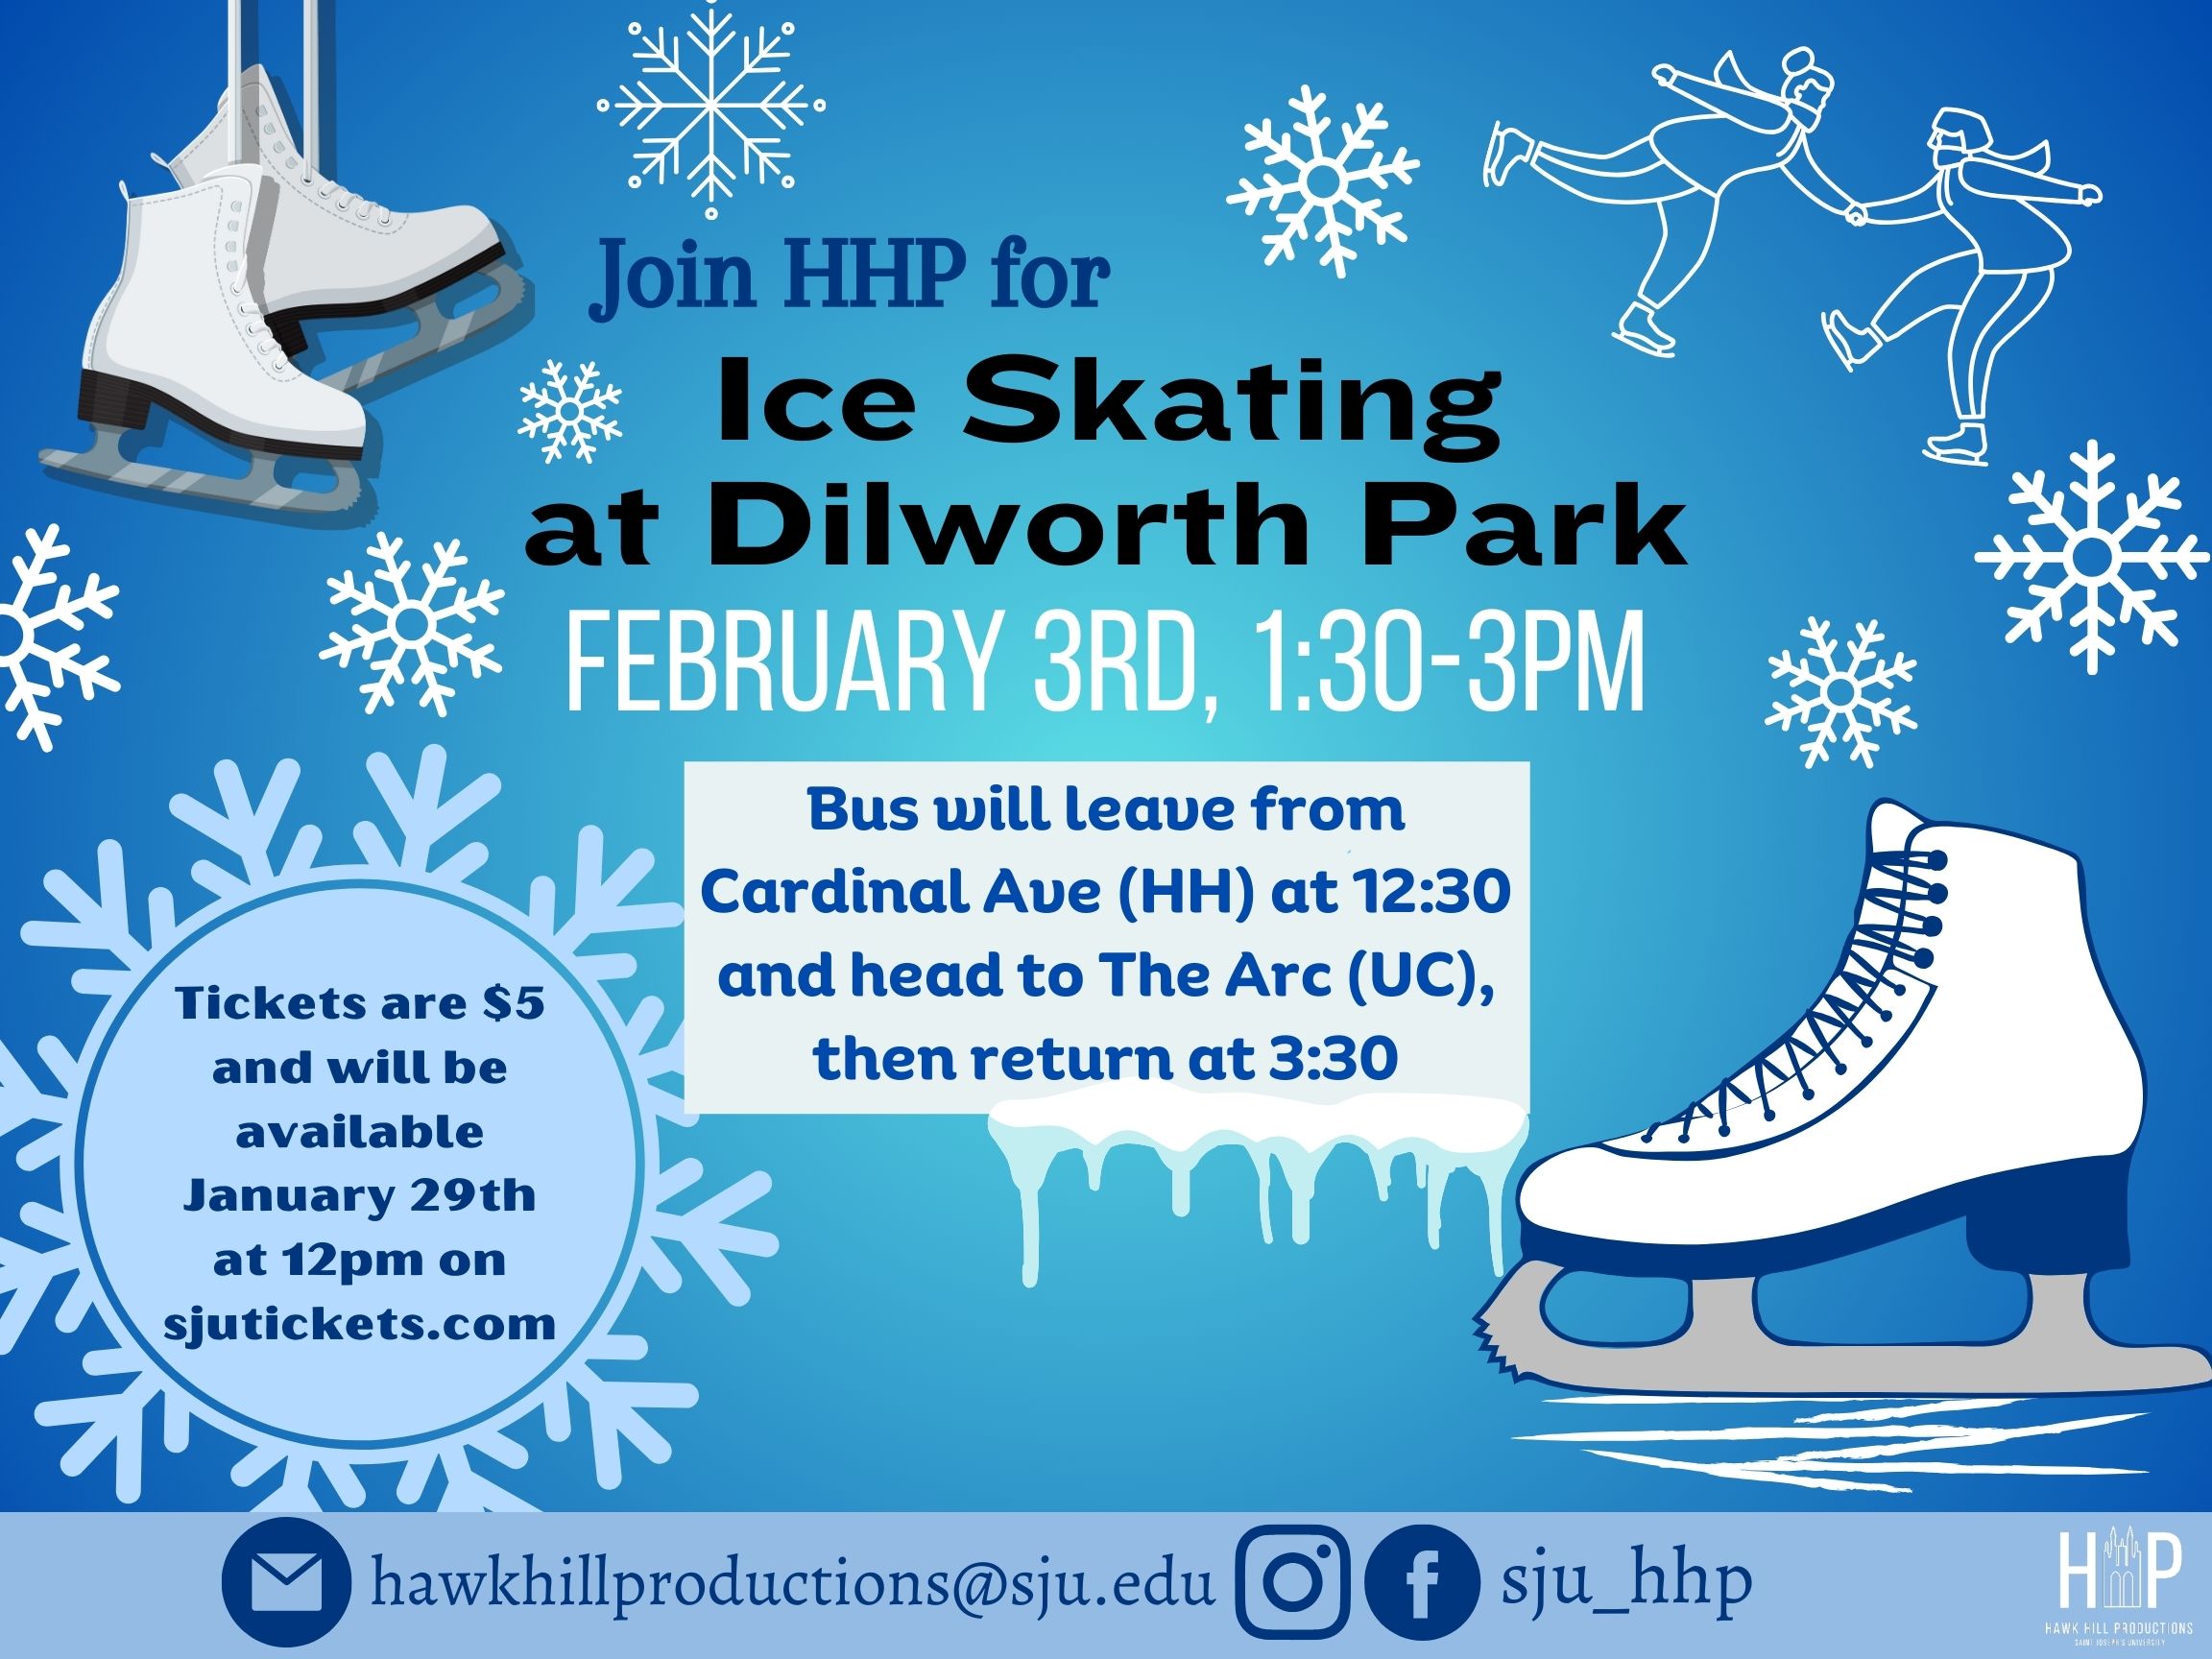 This is a flyer for an ice skating event with a blue background, black text, and white ice skates and snowflakes around the edge of the flyer.